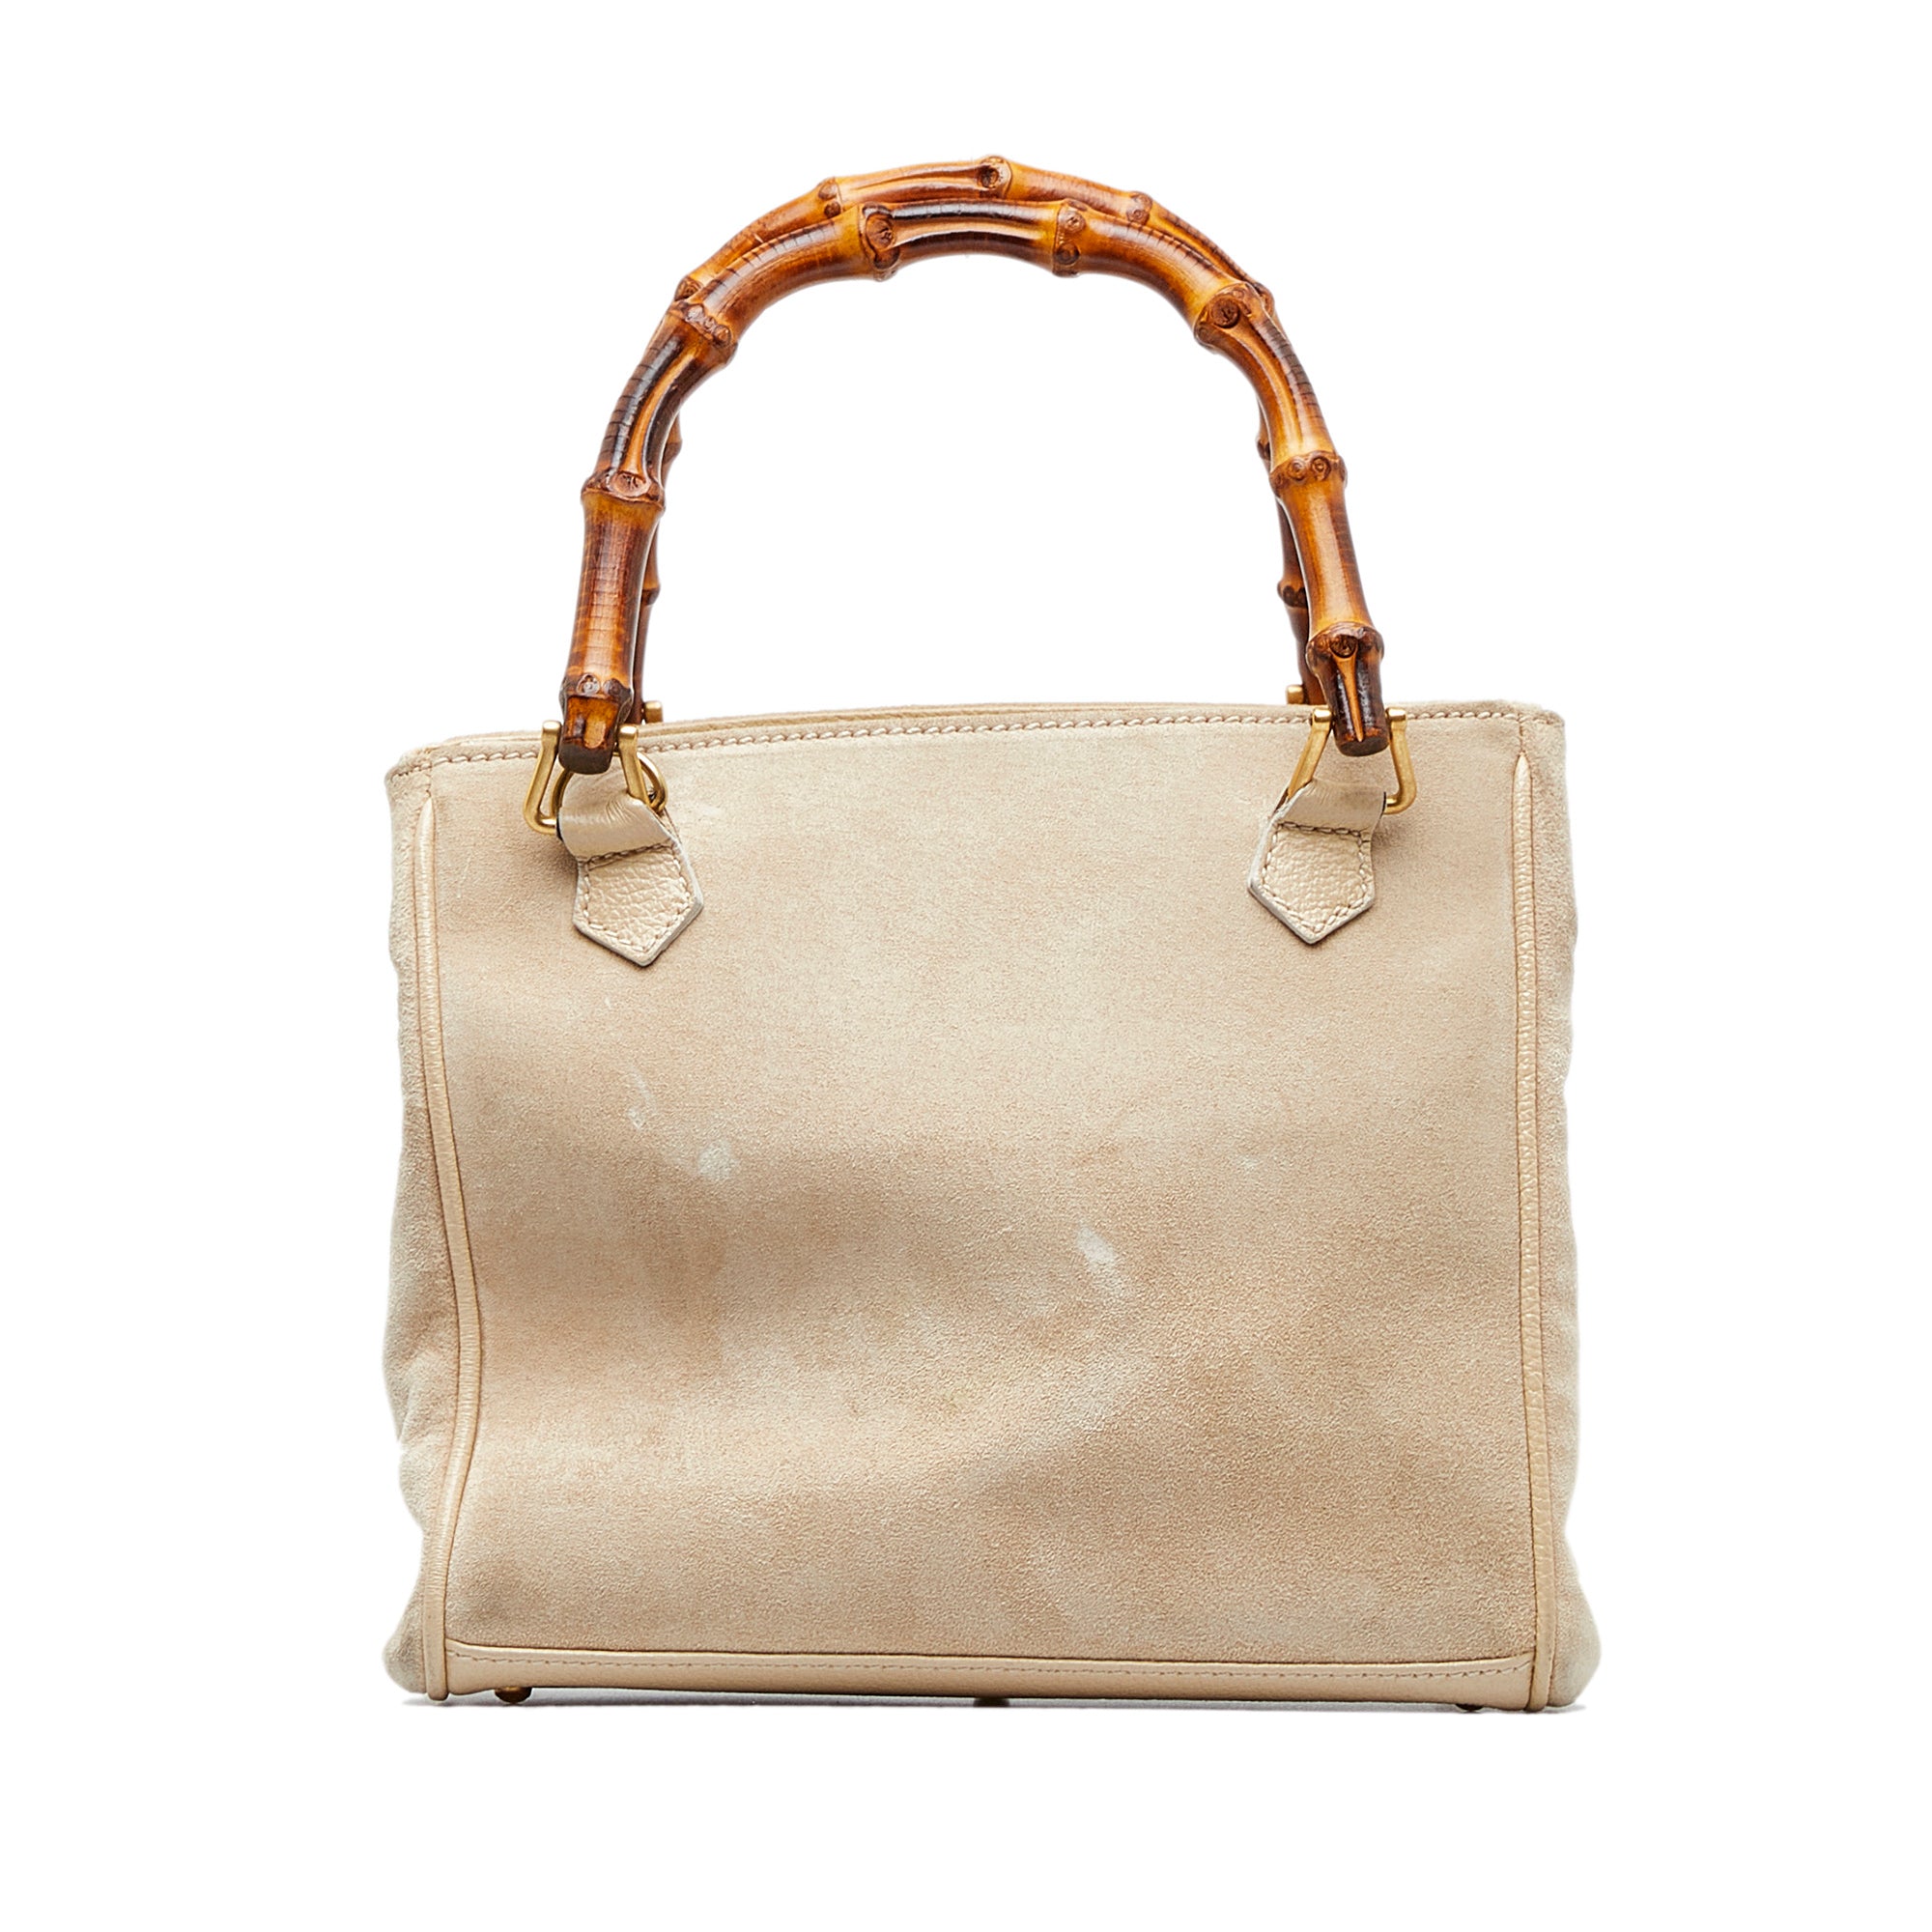 Gucci Hand Bag Bamboo Beige Suede